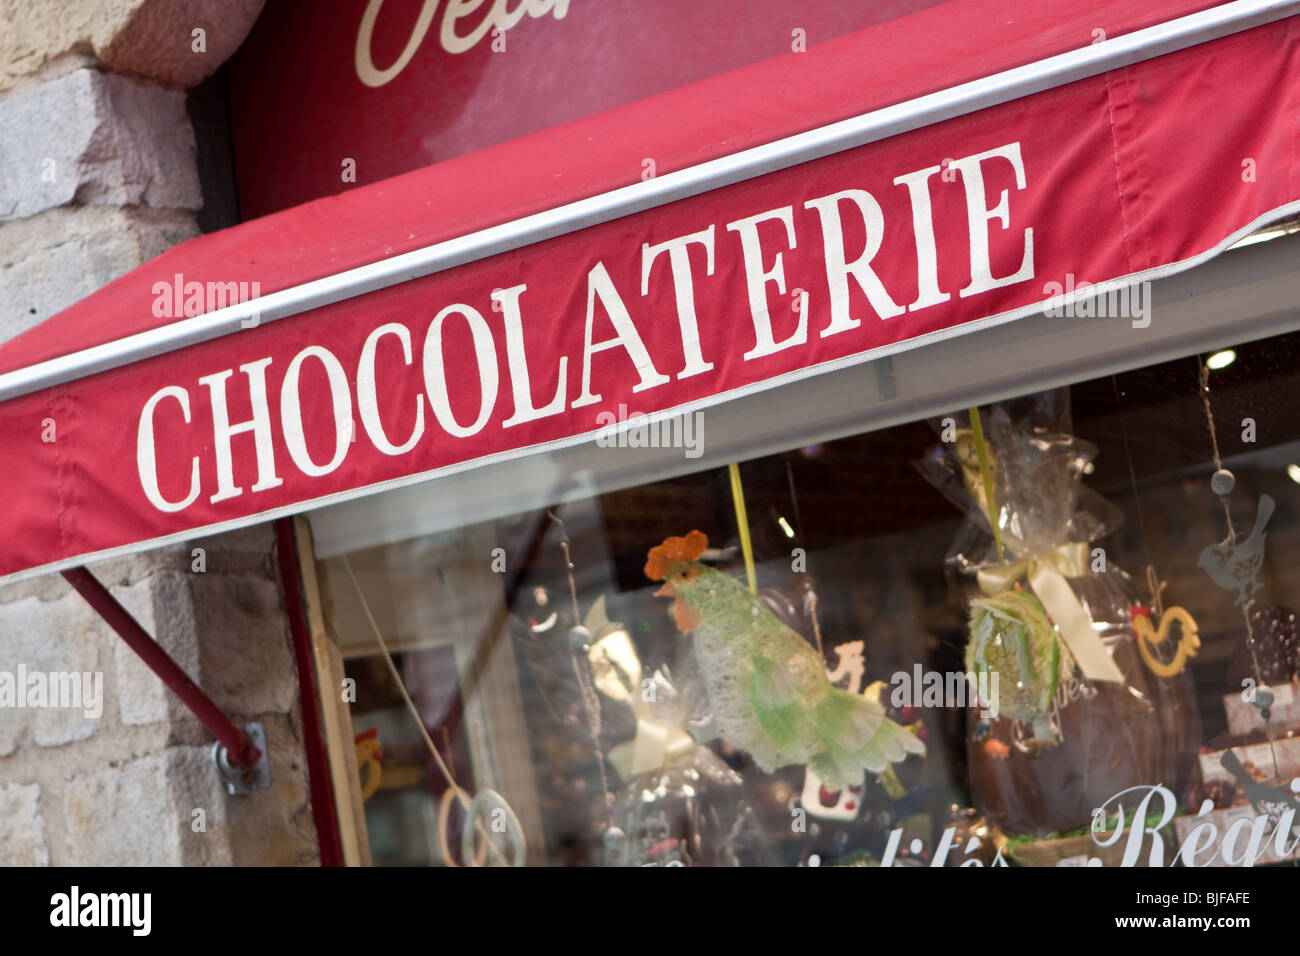 Chocolaterie Shop in Lille France Stock Photo